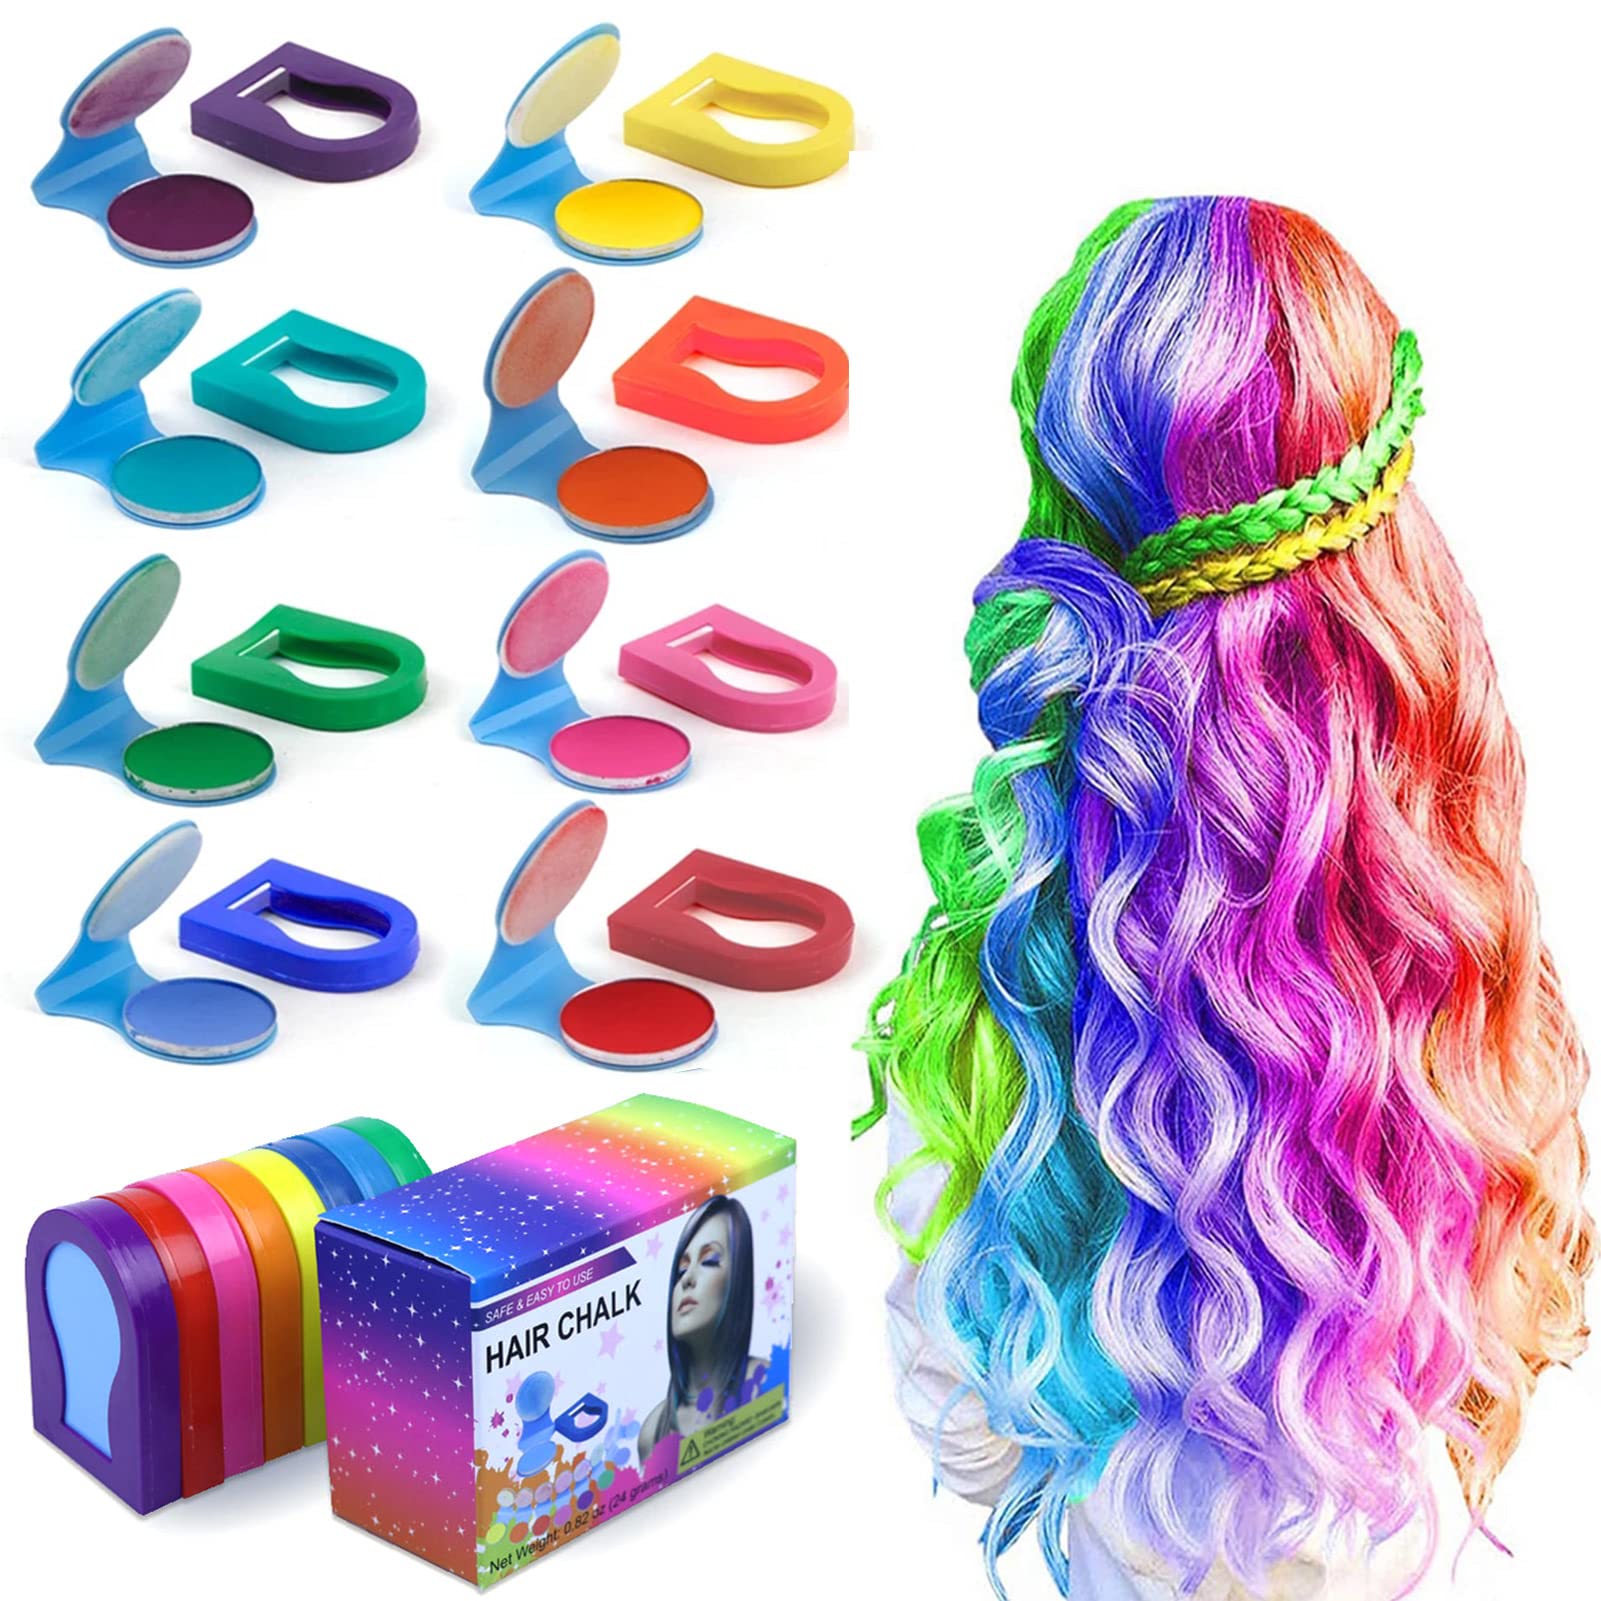 CHPBOLLY Hair Chalk for Kids 8-Color DIY Color girls with Dark, Blonde  Vibrant Temporary Gift